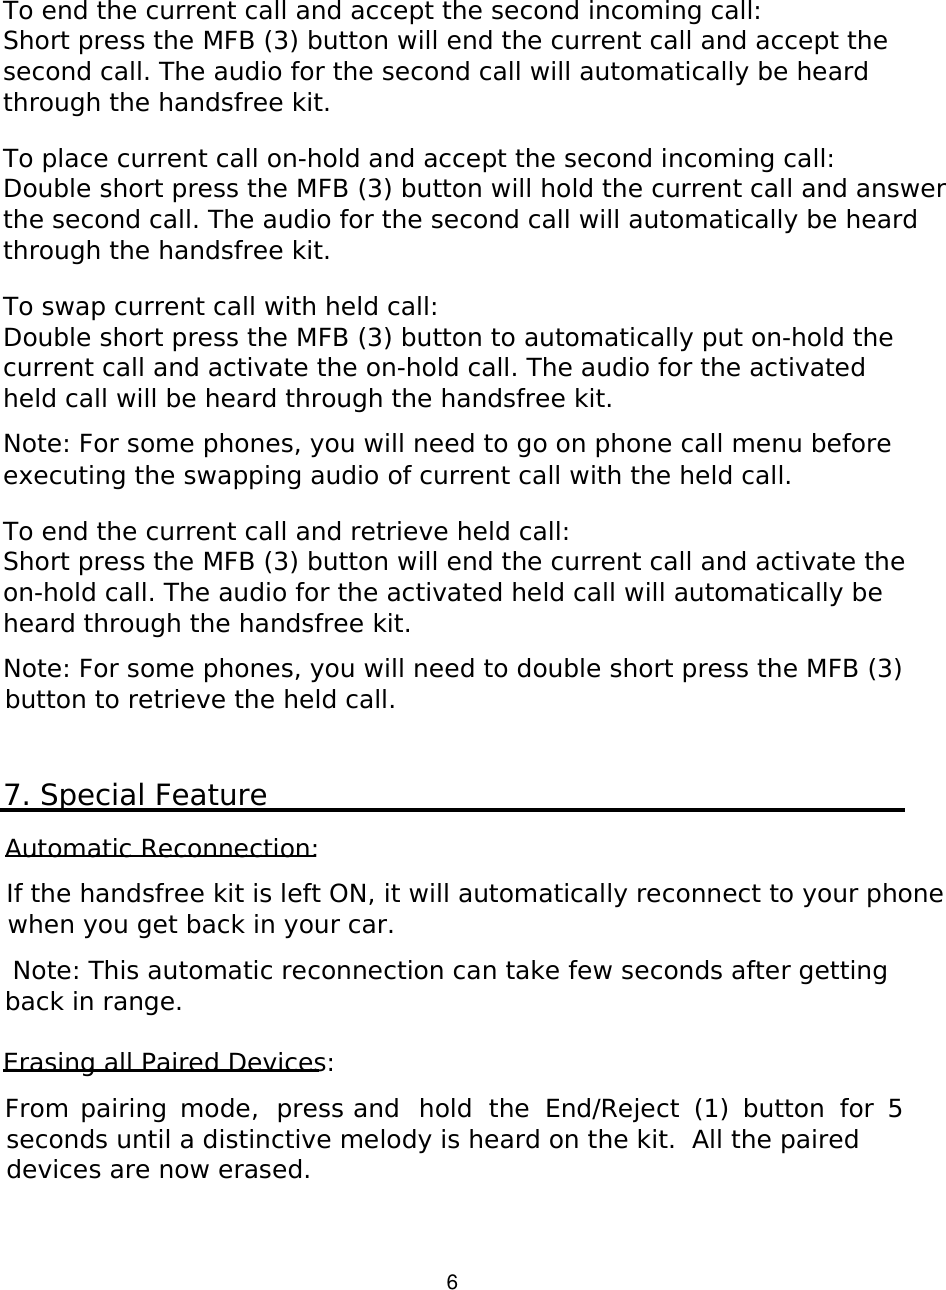   6 To end the current call and accept the second incoming call: Short press the MFB (3) button will end the current call and accept the second call. The audio for the second call will automatically be heard through the handsfree kit.  To place current call on-hold and accept the second incoming call: Double short press the MFB (3) button will hold the current call and answer the second call. The audio for the second call will automatically be heard through the handsfree kit.  To swap current call with held call: Double short press the MFB (3) button to automatically put on-hold the current call and activate the on-hold call. The audio for the activated held call will be heard through the handsfree kit.  Note: For some phones, you will need to go on phone call menu before executing the swapping audio of current call with the held call.   To end the current call and retrieve held call: Short press the MFB (3) button will end the current call and activate the on-hold call. The audio for the activated held call will automatically be heard through the handsfree kit.  Note: For some phones, you will need to double short press the MFB (3) button to retrieve the held call.   7. Special Feature  Automatic Reconnection:  If the handsfree kit is left ON, it will automatically reconnect to your phone when you get back in your car.    Note: This automatic reconnection can take few seconds after getting back in range.  Erasing all Paired Devices:  From  pairing  mode,  press and  hold  the  End/Reject  (1)  button  for  5 seconds until a distinctive melody is heard on the kit.  All the paired devices are now erased.         